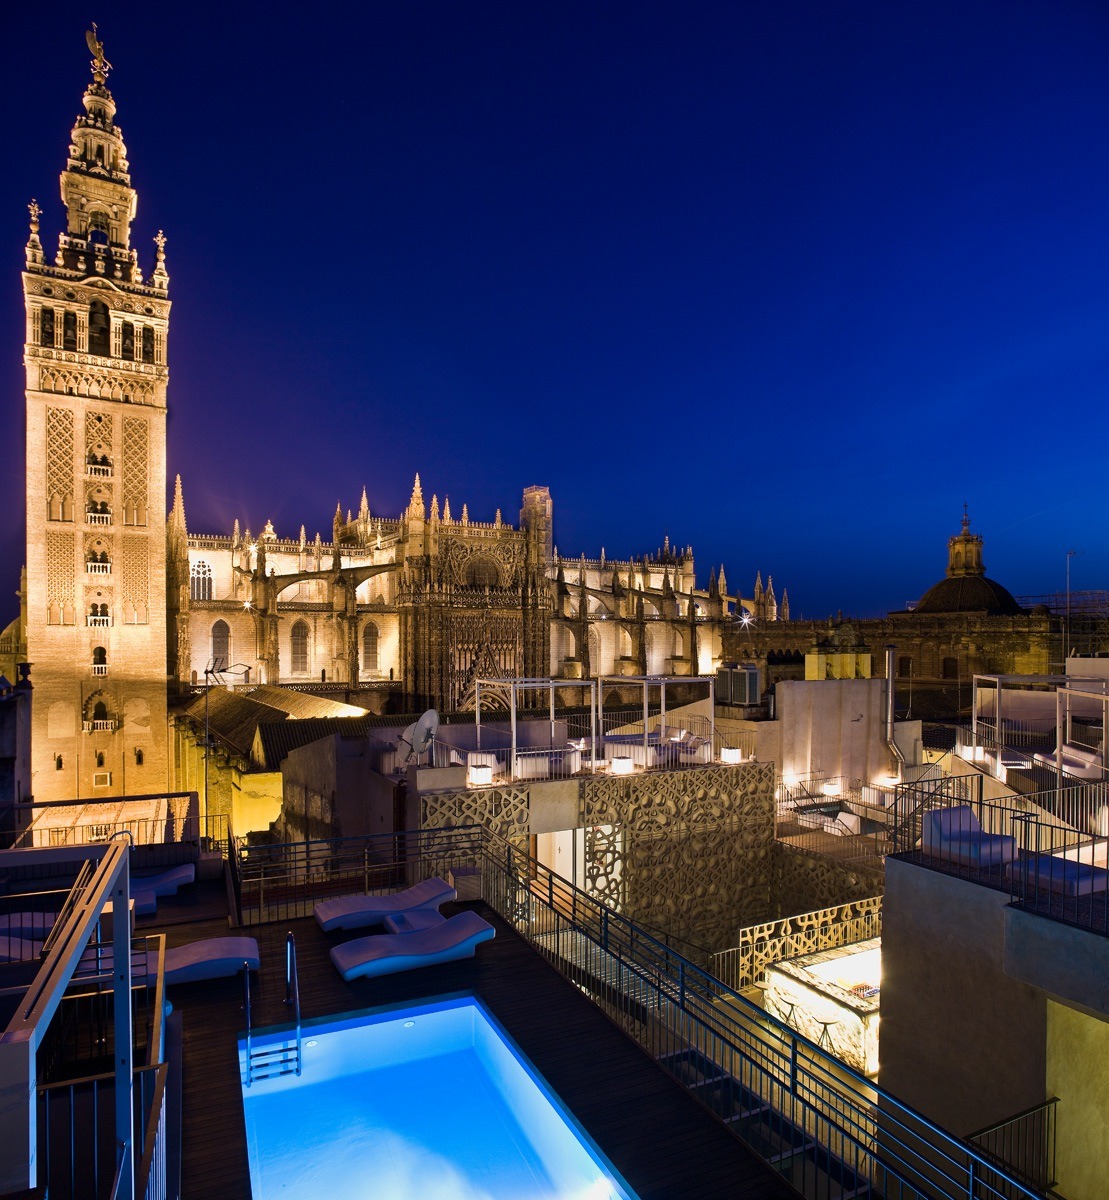 Thb Eme Catedral Hotel In Seville